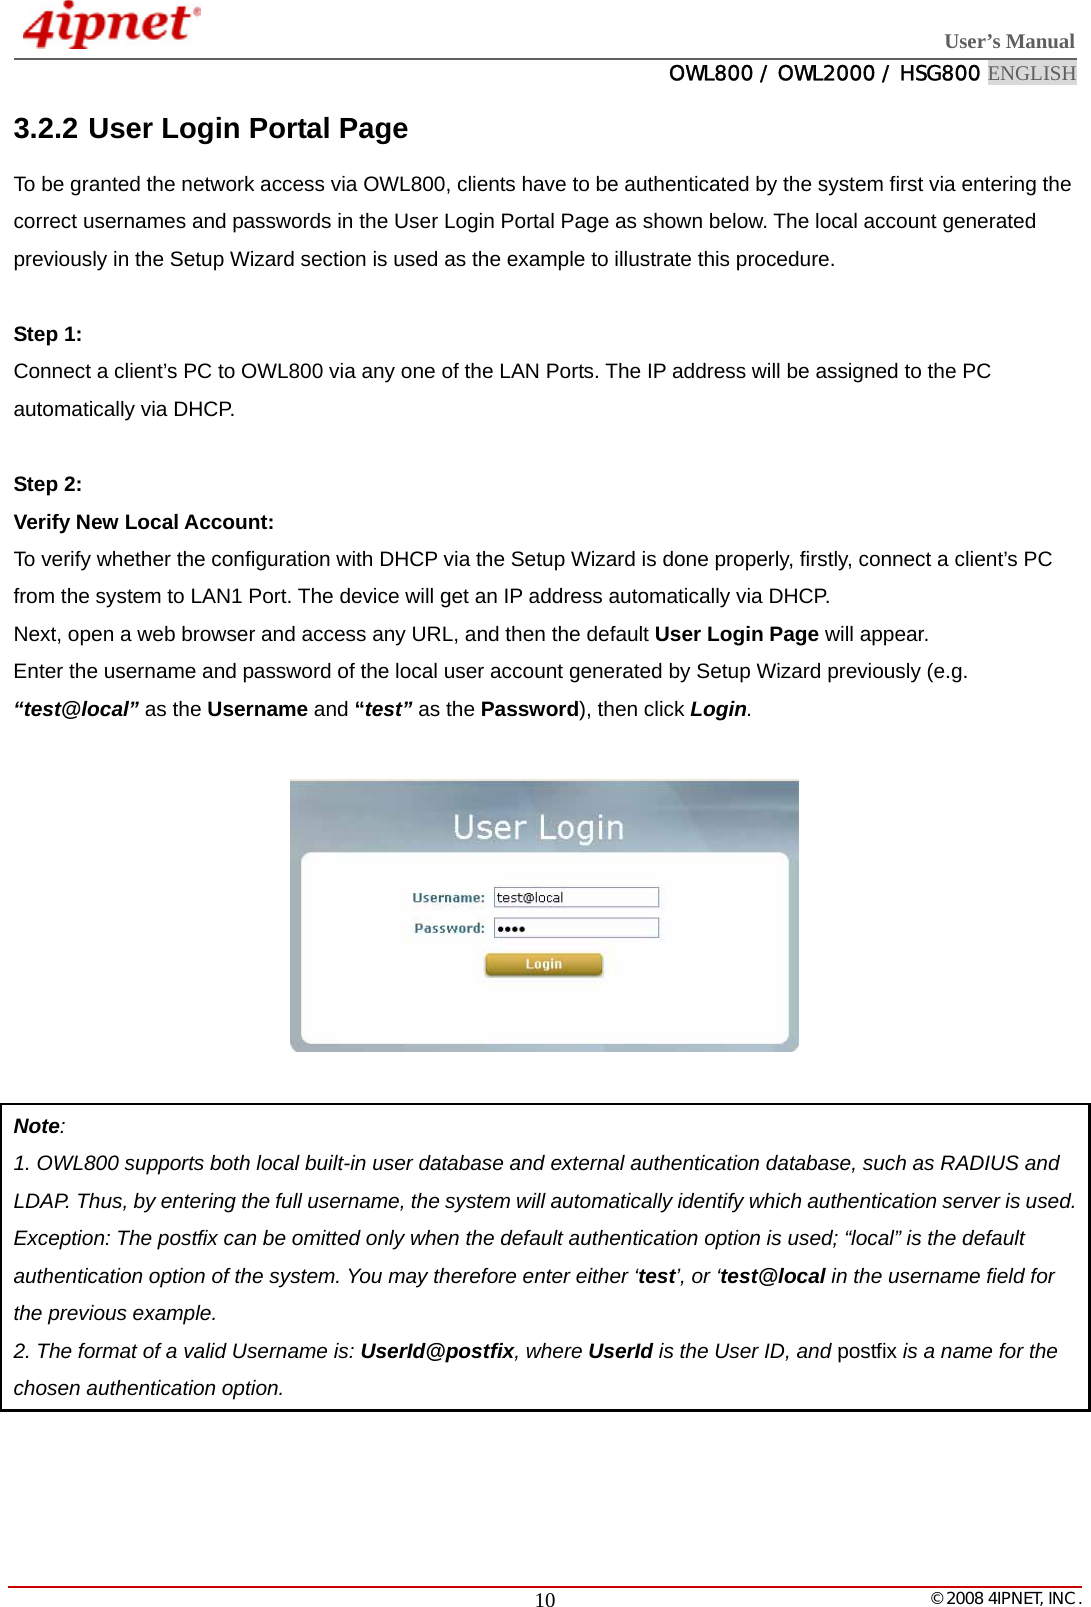  User’s Manual  OWL800 / OWL2000 / HSG800 ENGLISH   © 2008 4IPNET, INC.  103.2.2 User Login Portal Page To be granted the network access via OWL800, clients have to be authenticated by the system first via entering the correct usernames and passwords in the User Login Portal Page as shown below. The local account generated previously in the Setup Wizard section is used as the example to illustrate this procedure.  Step 1:  Connect a client’s PC to OWL800 via any one of the LAN Ports. The IP address will be assigned to the PC automatically via DHCP.    Step 2:  Verify New Local Account: To verify whether the configuration with DHCP via the Setup Wizard is done properly, firstly, connect a client’s PC from the system to LAN1 Port. The device will get an IP address automatically via DHCP.   Next, open a web browser and access any URL, and then the default User Login Page will appear. Enter the username and password of the local user account generated by Setup Wizard previously (e.g. “test@local” as the Username and “test” as the Password), then click Login.    Note:  1. OWL800 supports both local built-in user database and external authentication database, such as RADIUS and   LDAP. Thus, by entering the full username, the system will automatically identify which authentication server is used. Exception: The postfix can be omitted only when the default authentication option is used; “local” is the default authentication option of the system. You may therefore enter either ‘test’, or ‘test@local in the username field for the previous example. 2. The format of a valid Username is: UserId@postfix, where UserId is the User ID, and postfix is a name for the chosen authentication option.  